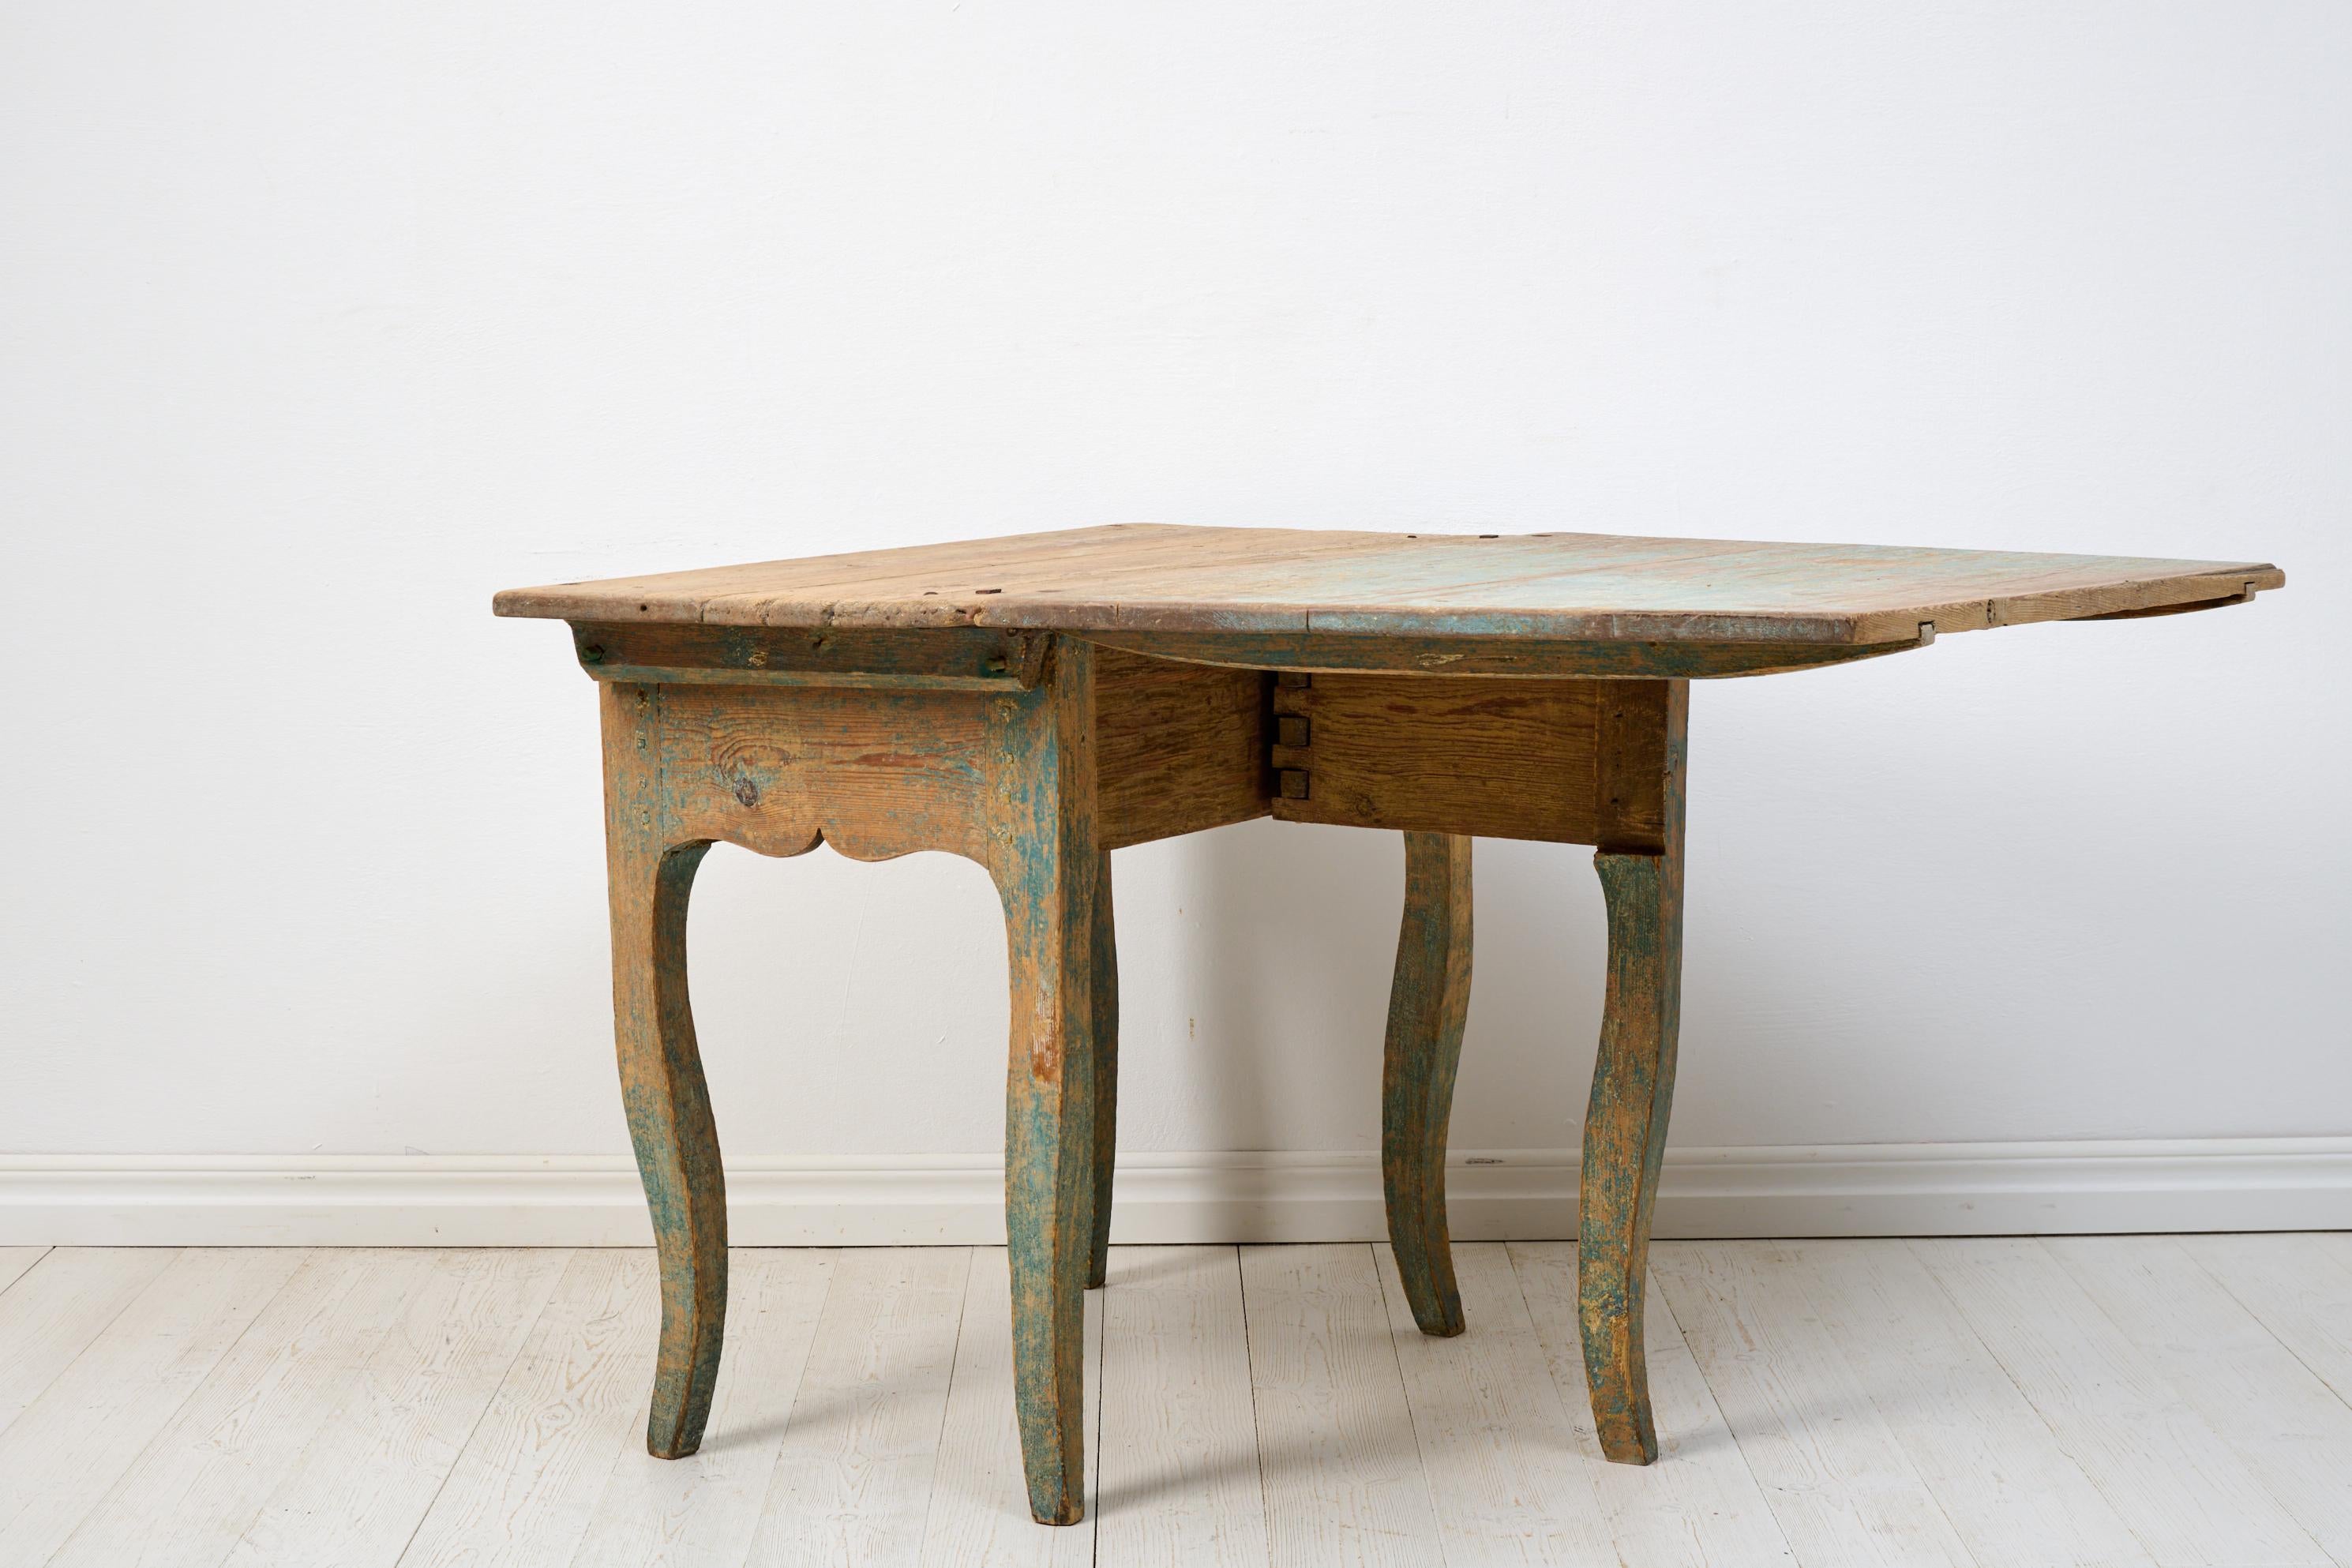 Antique Swedish Rococo Rustic Charming Pine Drop-Leaf Table In Good Condition For Sale In Kramfors, SE